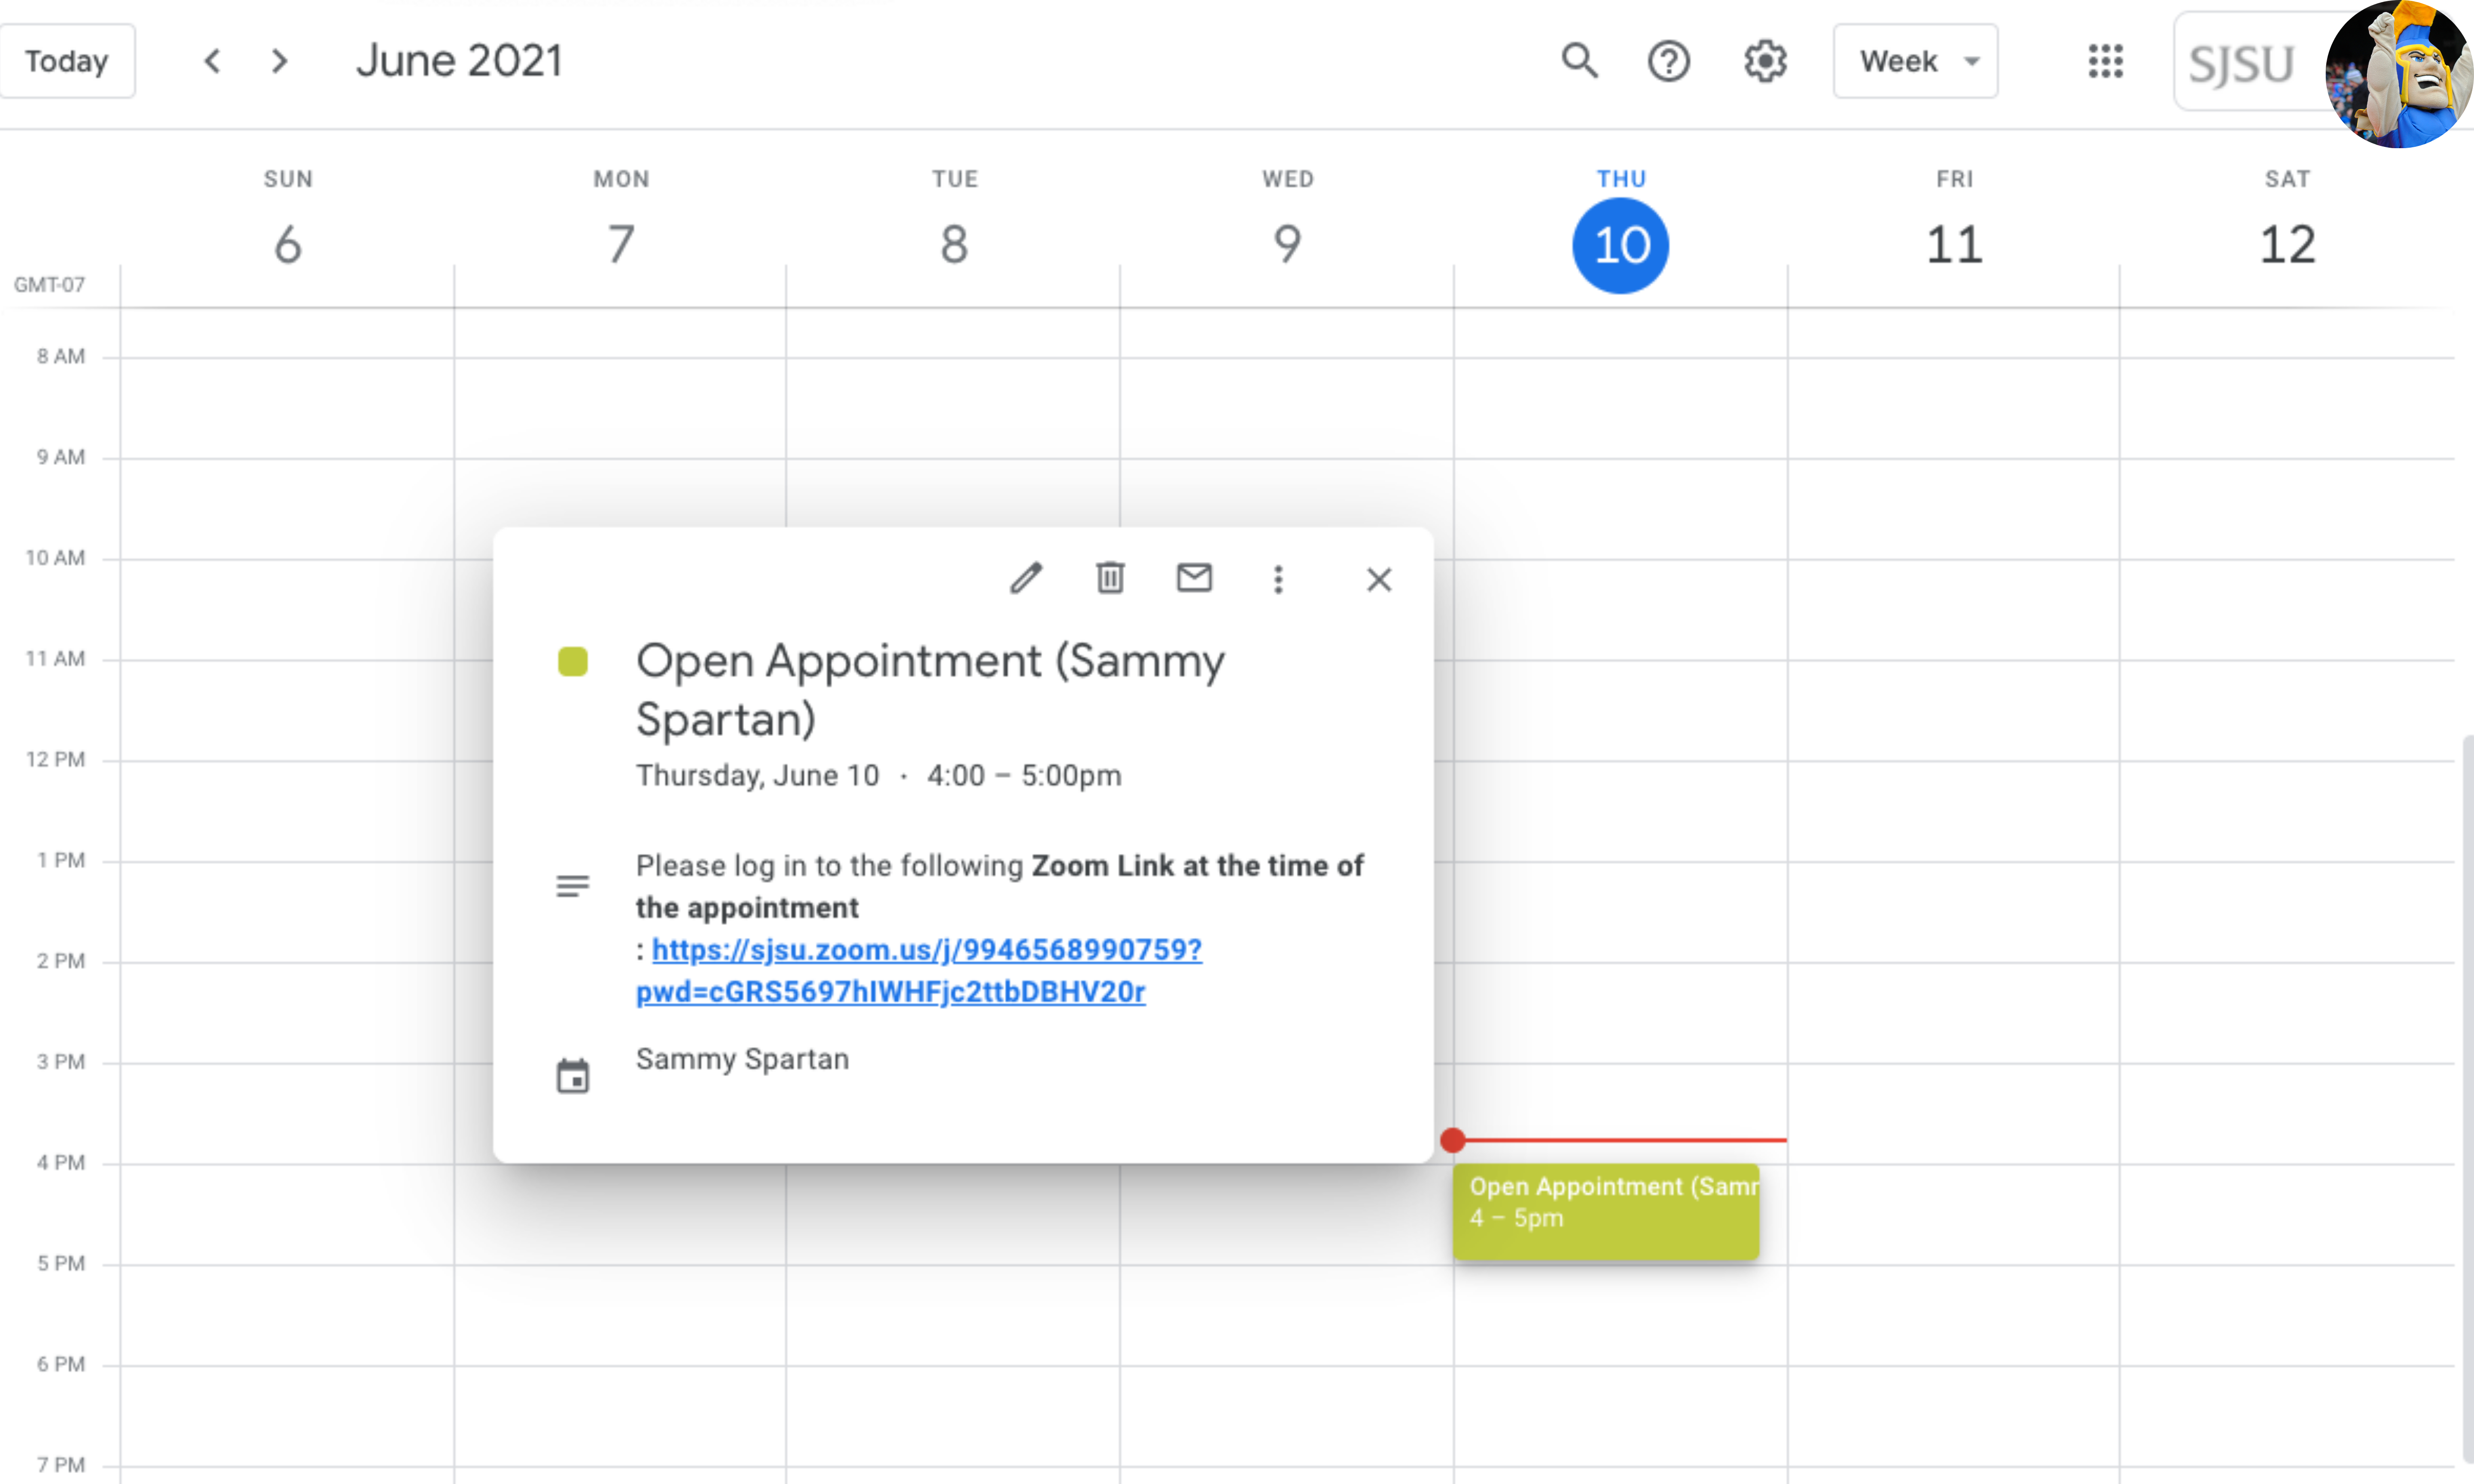 Image of google calendar and what the appoinment confirmation looks like